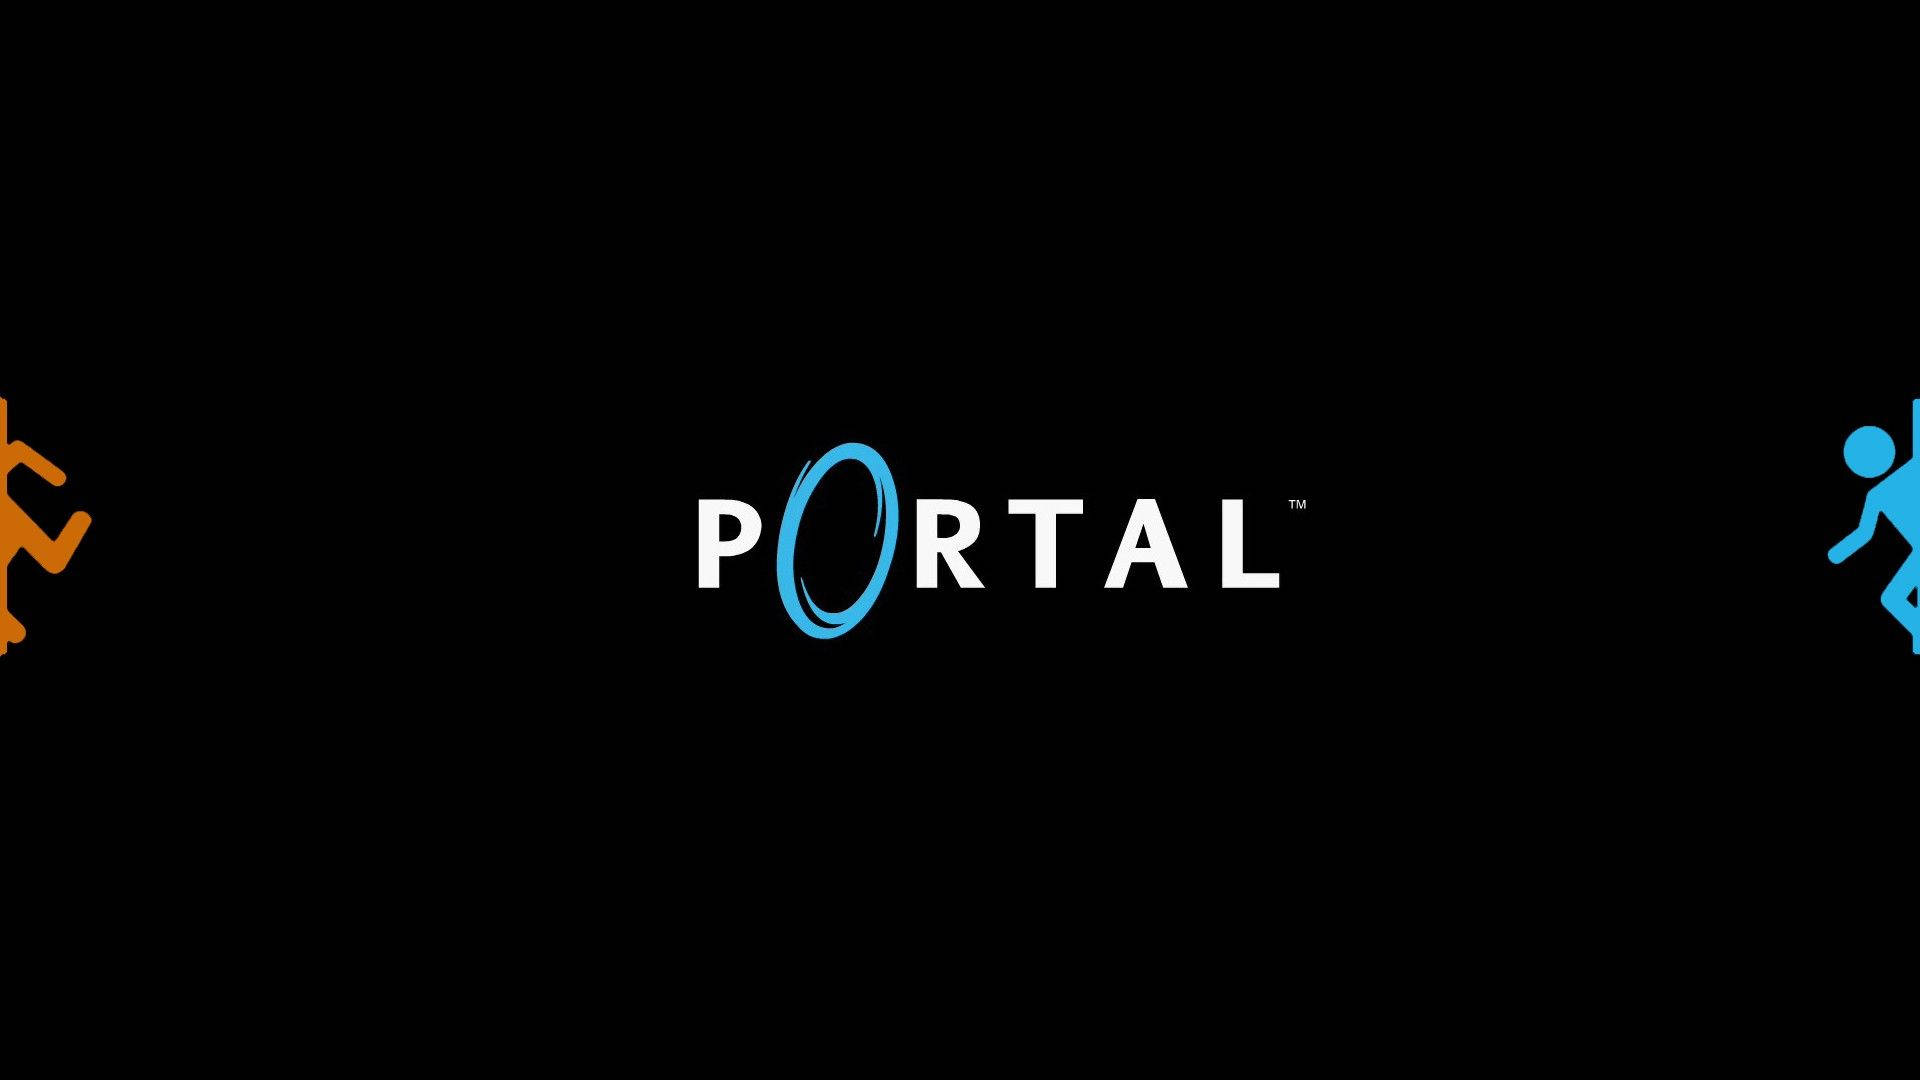 Portal 1920X1080 Wallpaper and Background Image